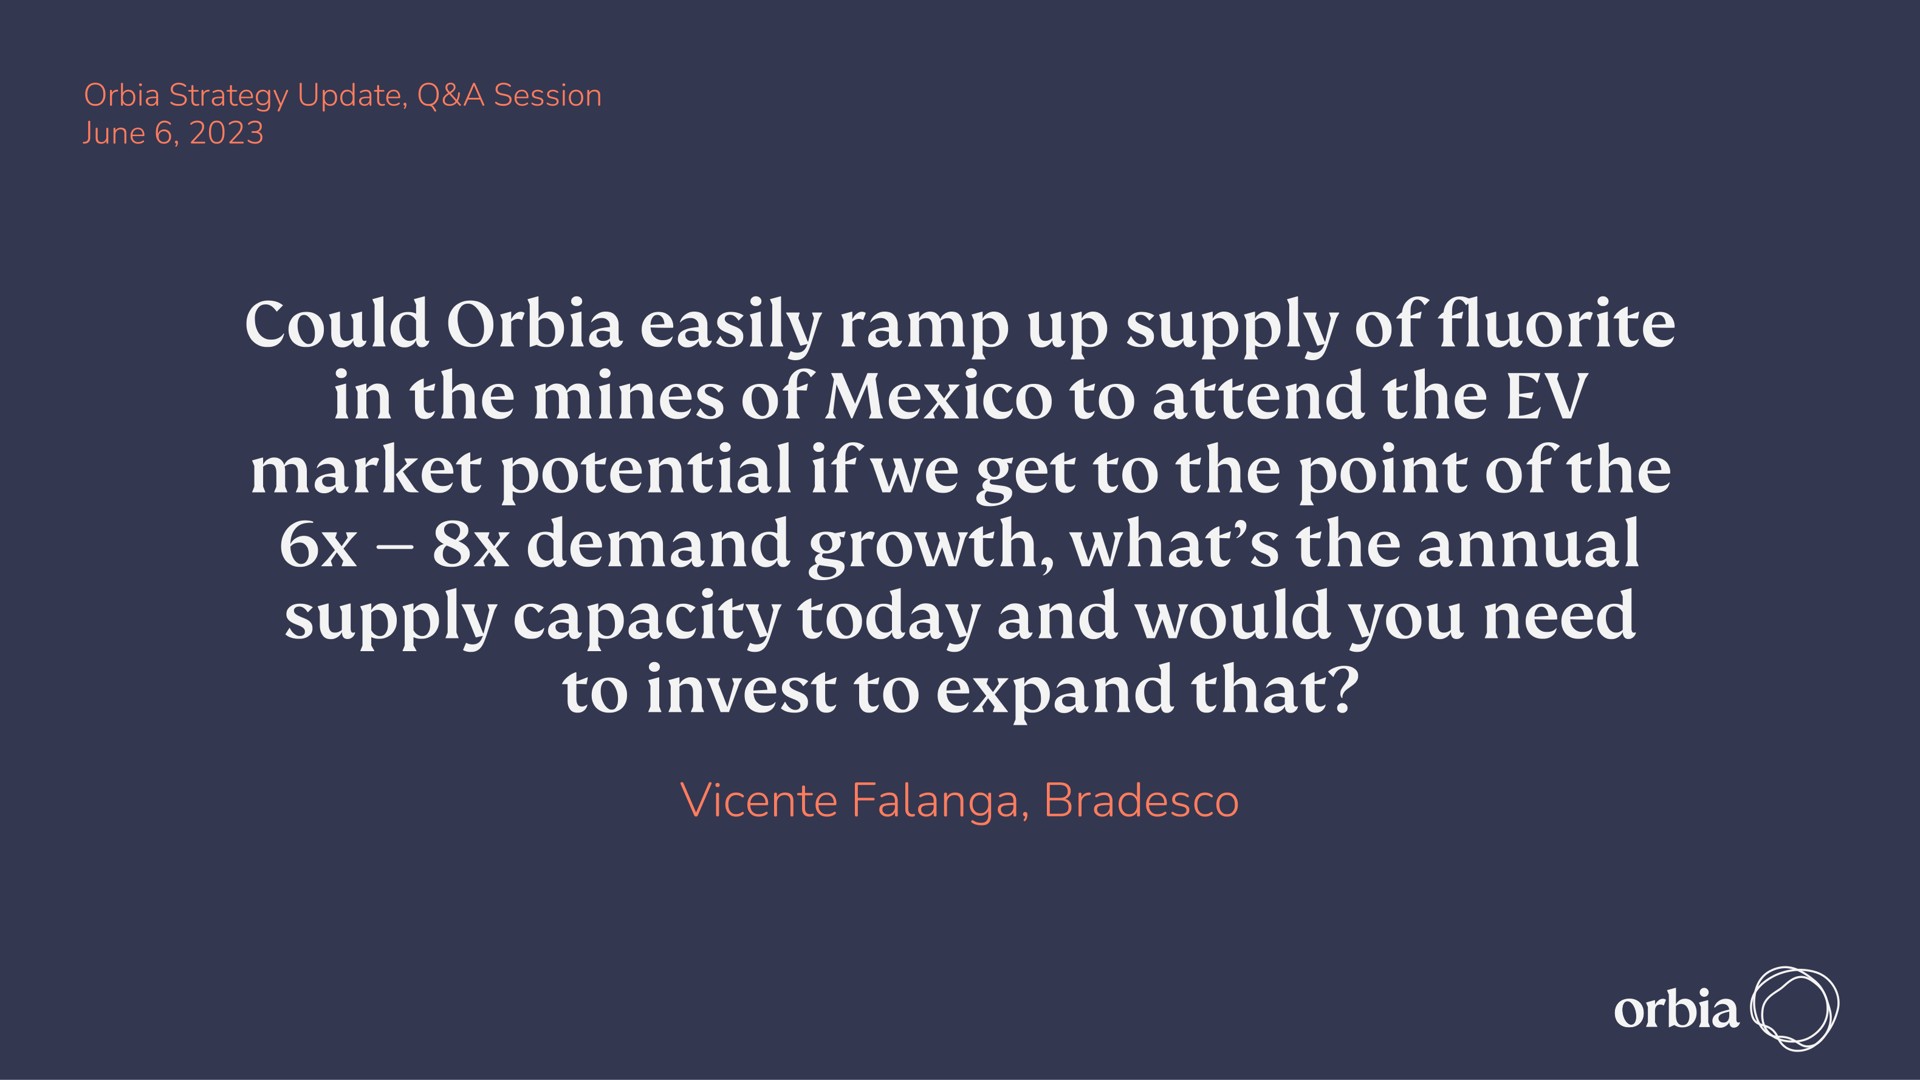 could easily ramp up supply of fluorite in the mines of to attend the market potential if we get to the point of the demand growth what the annual supply capacity today and would you need to invest to expand that rede | Orbia